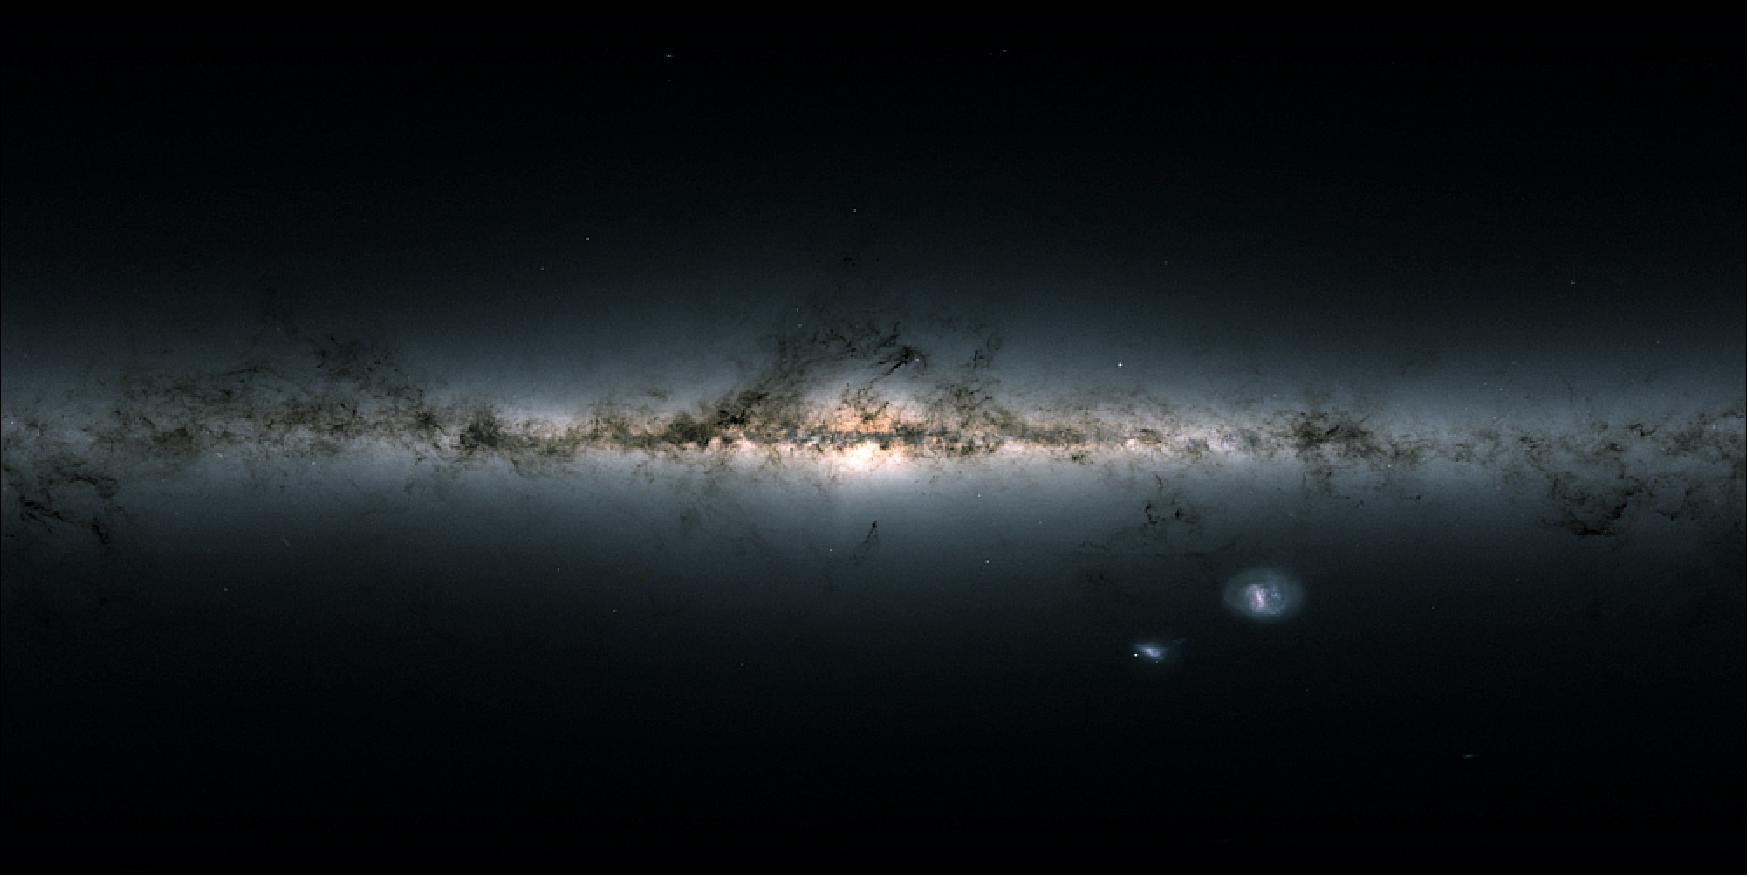 Figure 22: Gaia's all-sky view of our Milky Way Galaxy and neighboring galaxies, based on measurements of nearly 1.7 billion stars and displayed in an equirectangular projection. It has been obtained by projecting the celestial sphere onto a rectangle and is suitable for full-dome presentations. The map shows the total brightness and color of stars observed by the ESA satellite in each portion of the sky between July 2014 and May 2016. Brighter regions indicate denser concentrations of especially bright stars, while darker regions correspond to patches of the sky where fewer bright stars are observed. The color representation is obtained by combining the total amount of light with the amount of blue and red light recorded by Gaia in each patch of the sky (image credit: ESA/Gaia/DPAC, CC BY-SA 3.0 IGO)